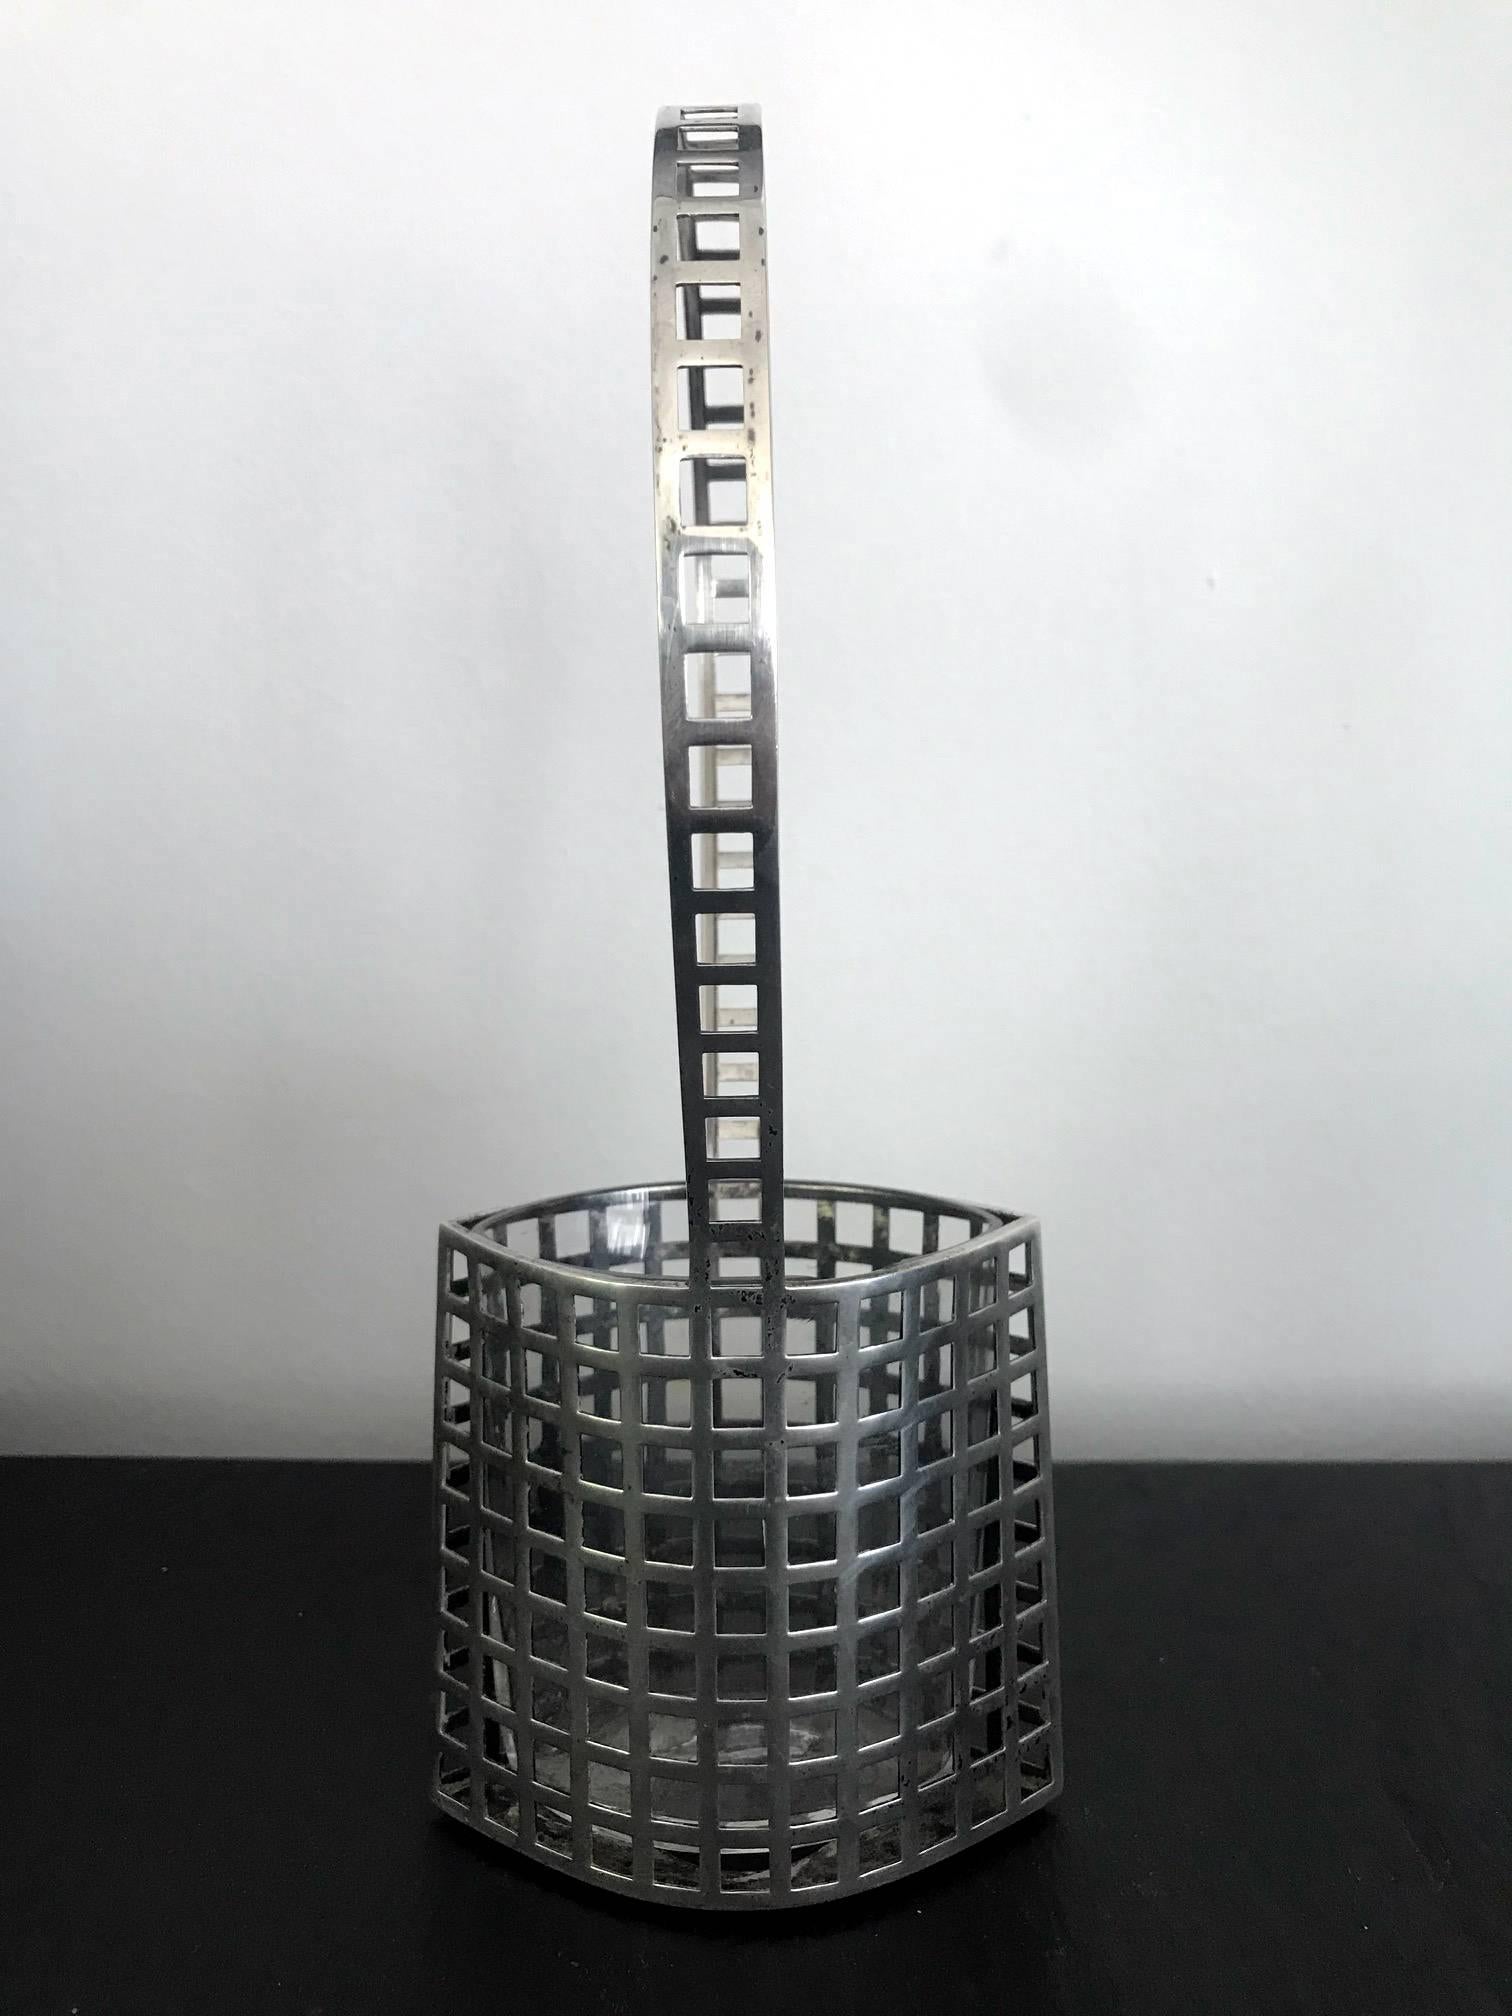 A Wiener Werkstatte silver reticulated flower basket with original glass insert in a very rare model made with silver. Designed by Josef Hoffmann (Austrian, 1870-1956), Vienna, circa 1906 and produced by the Wiener Werkstatte from 1906-1916 in